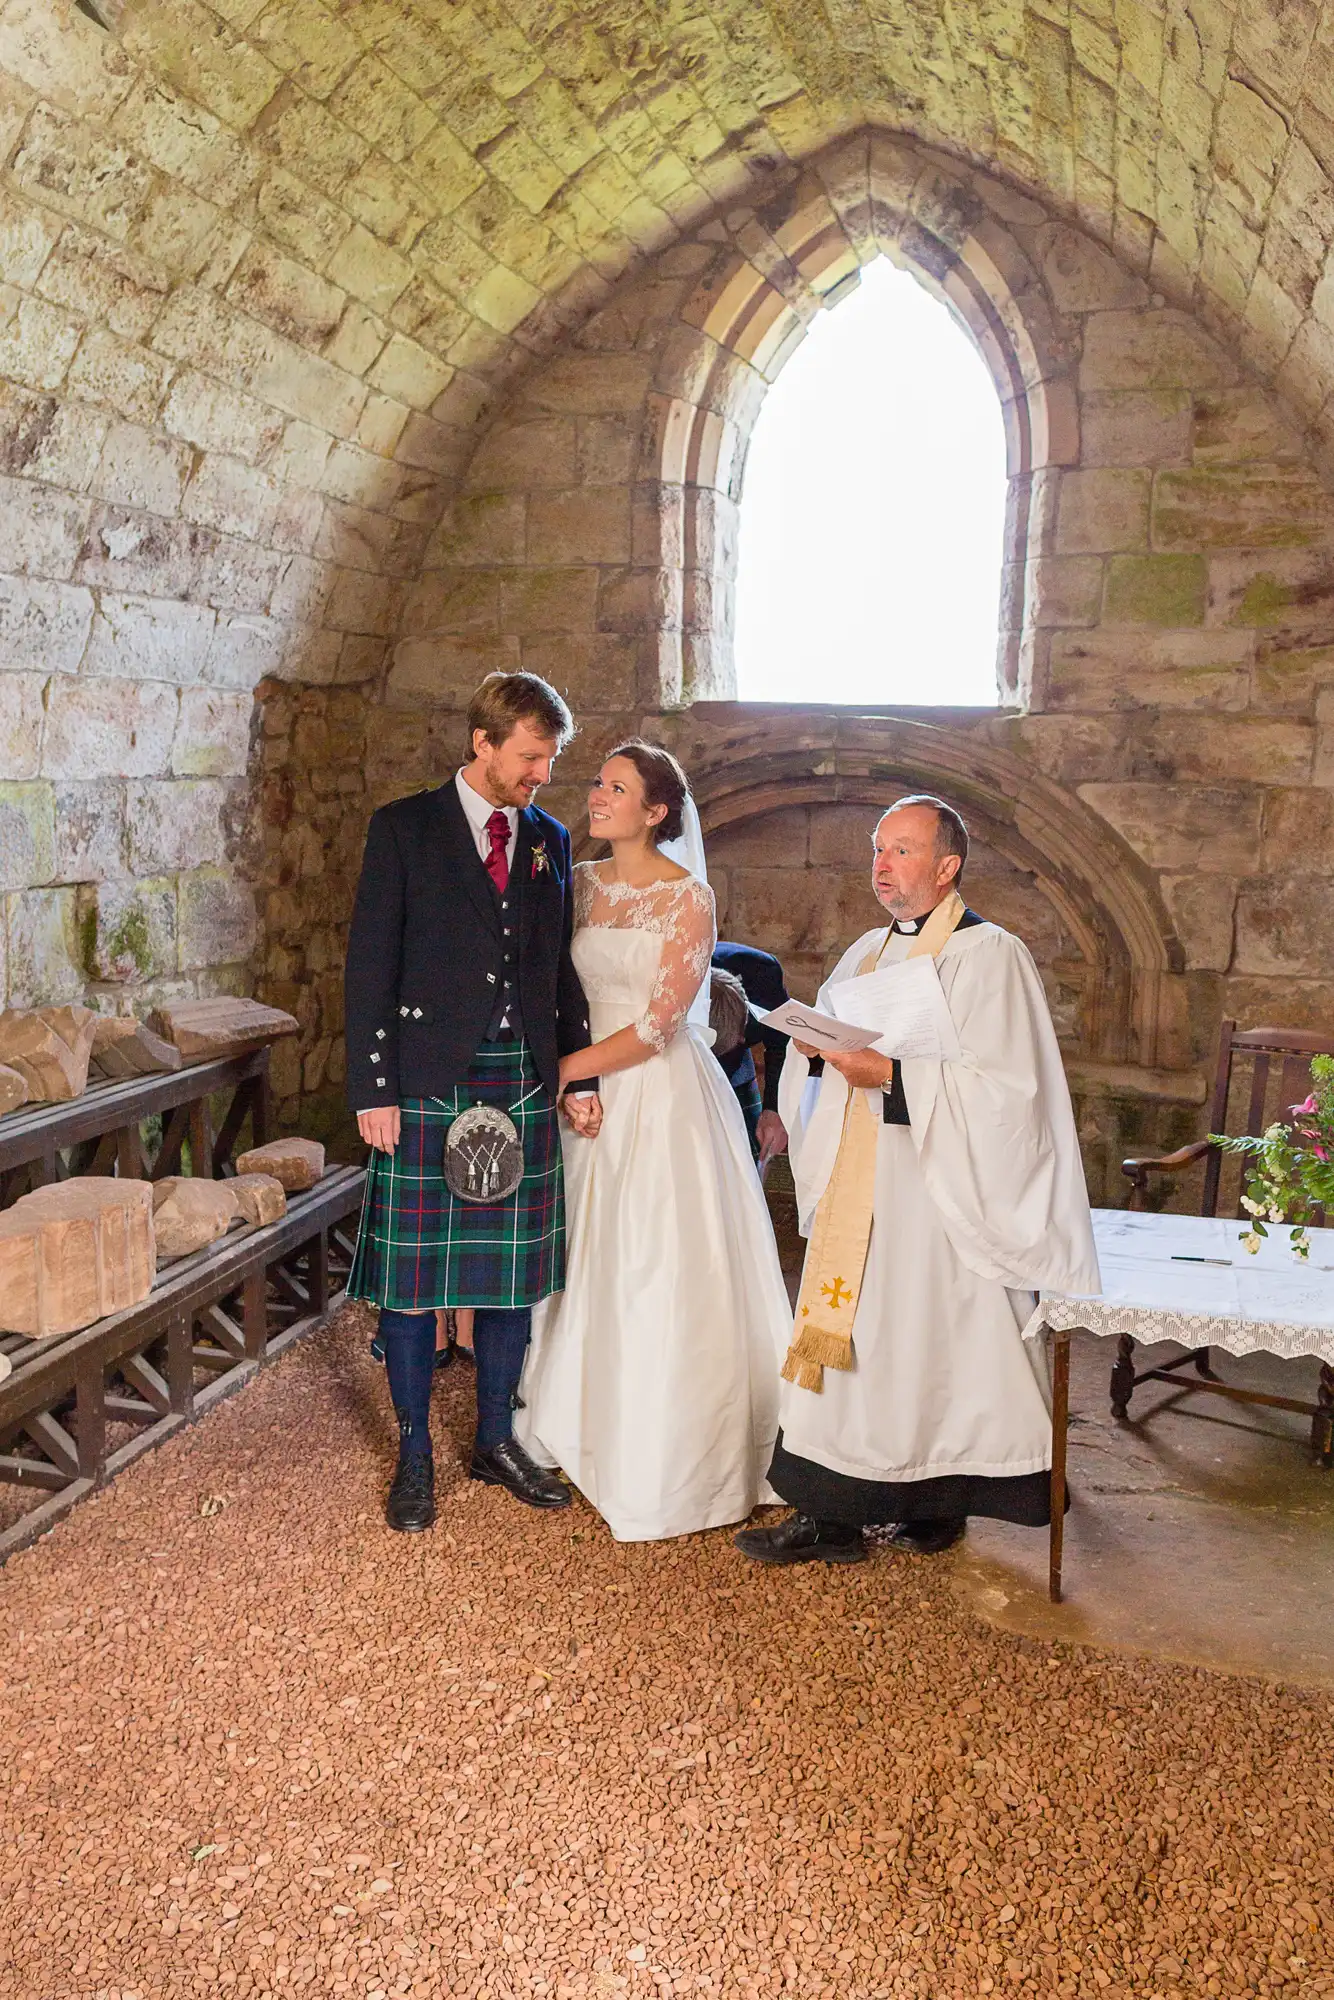 Bride and groom in a stone chapel, with the groom wearing a kilt and the bride in a long white dress, standing beside a priest during their wedding ceremony.